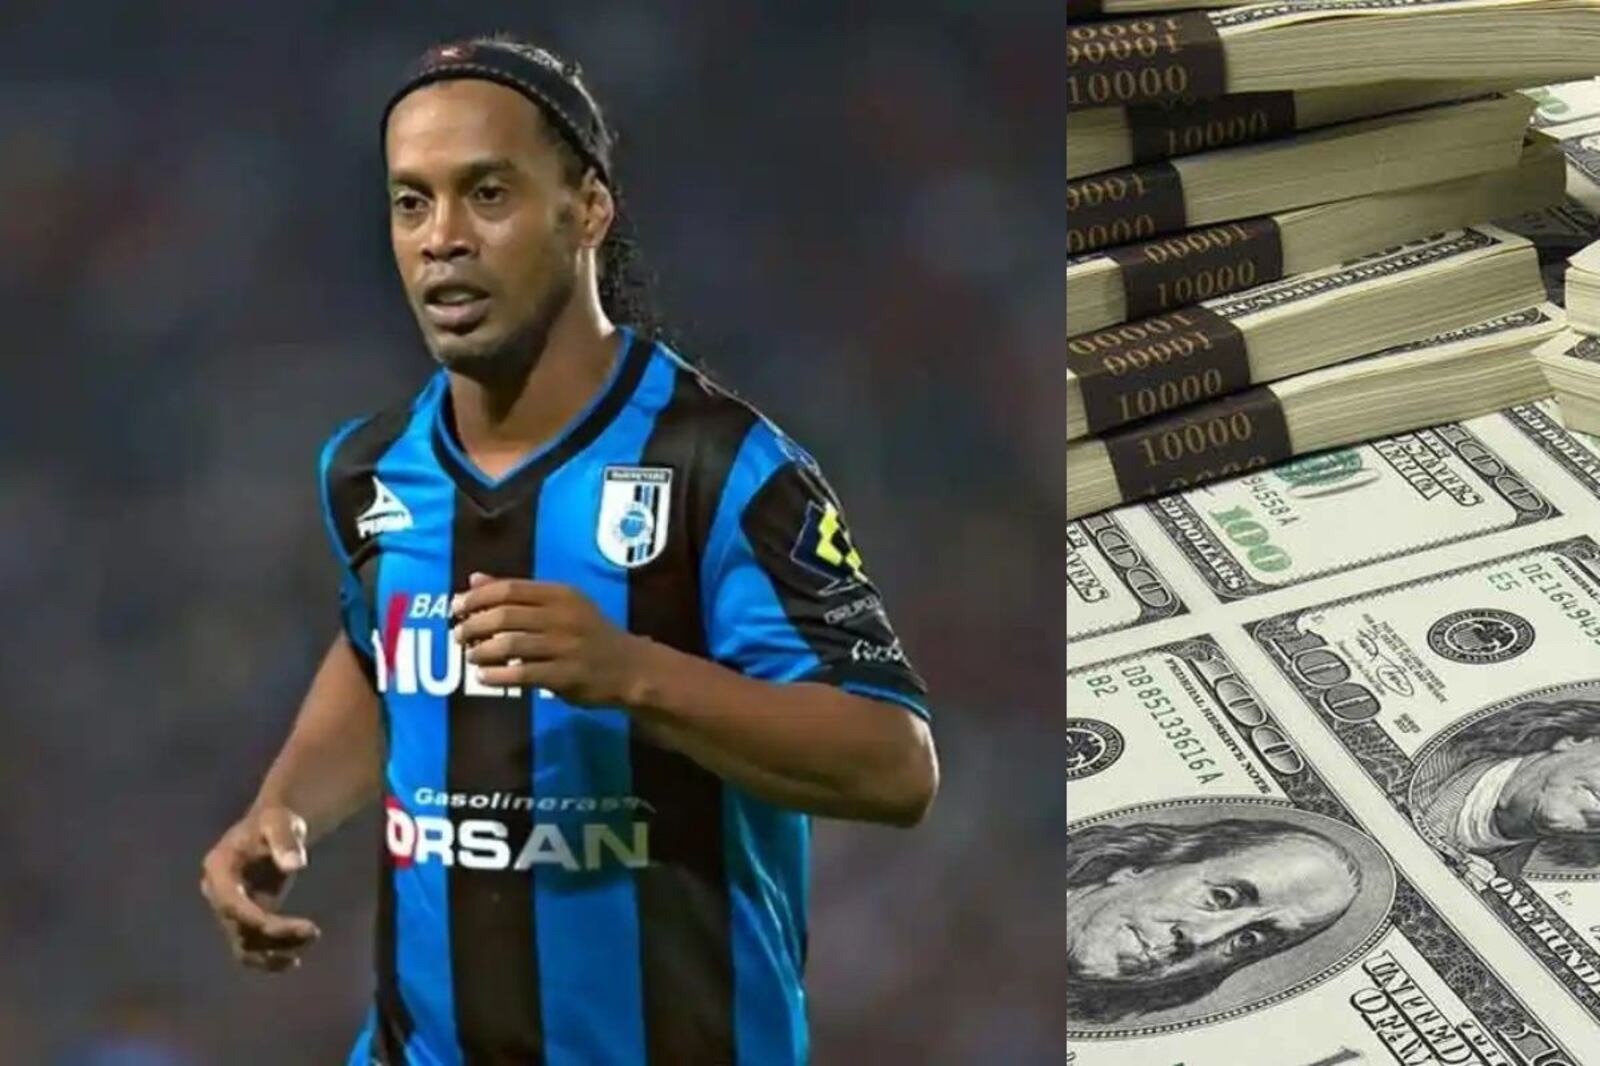 From winning 90 million euros, this was what Ronaldinho earned to return to Querétaro FC